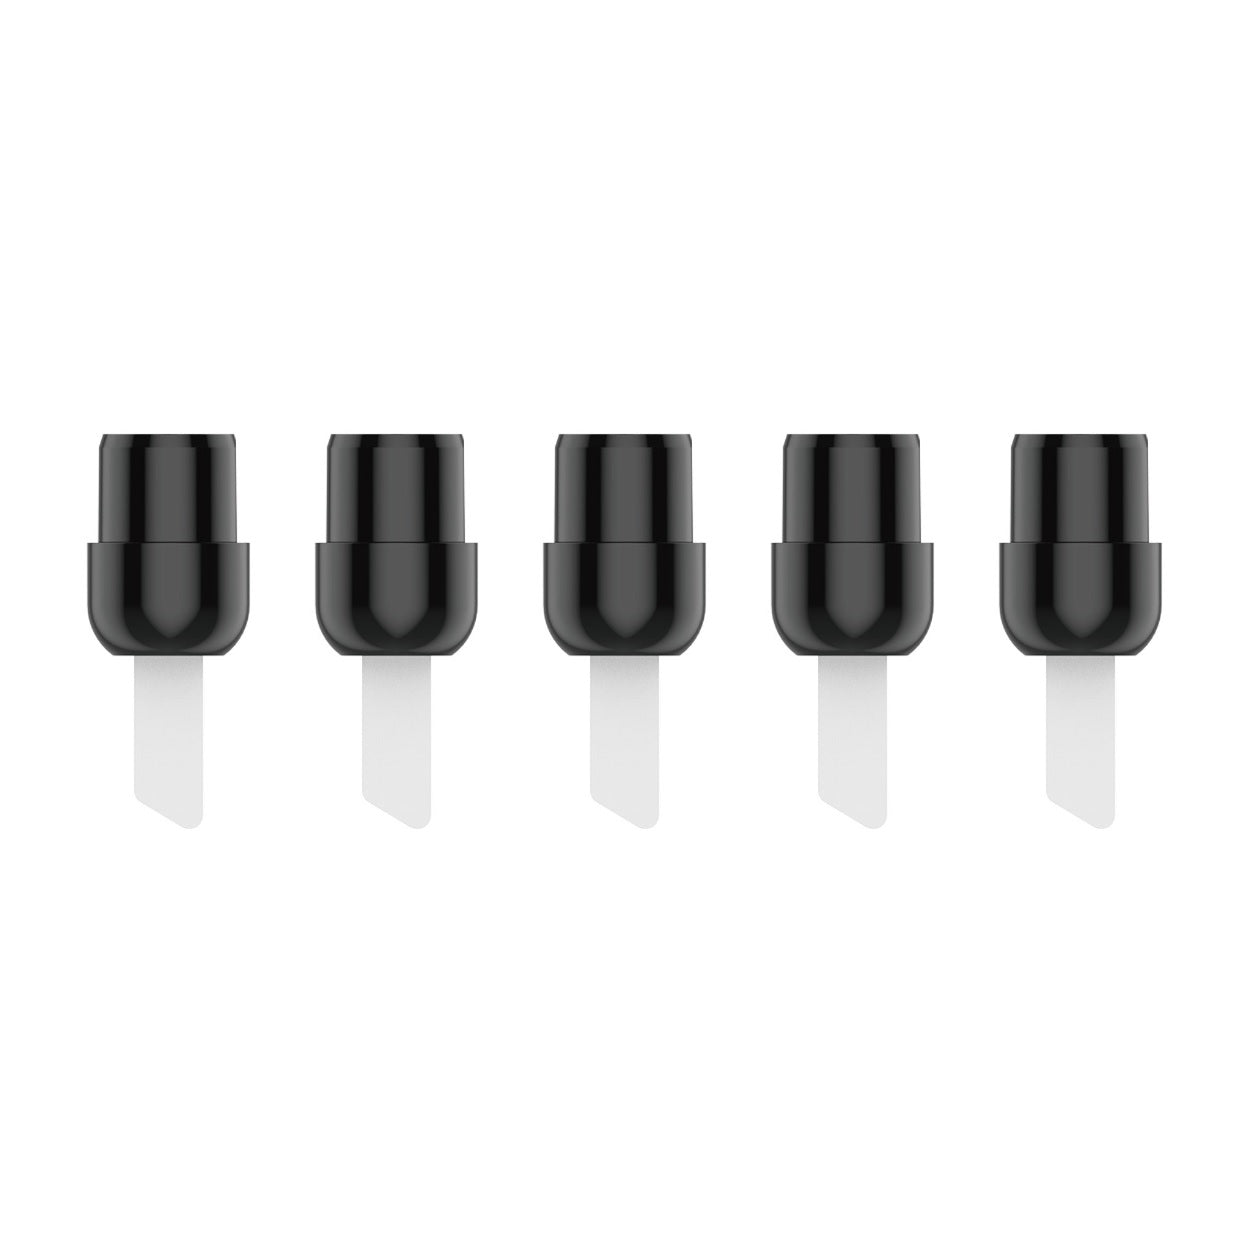 Yocan Black JAWS Replacement Ceramic Hot Knife - 5 Pack